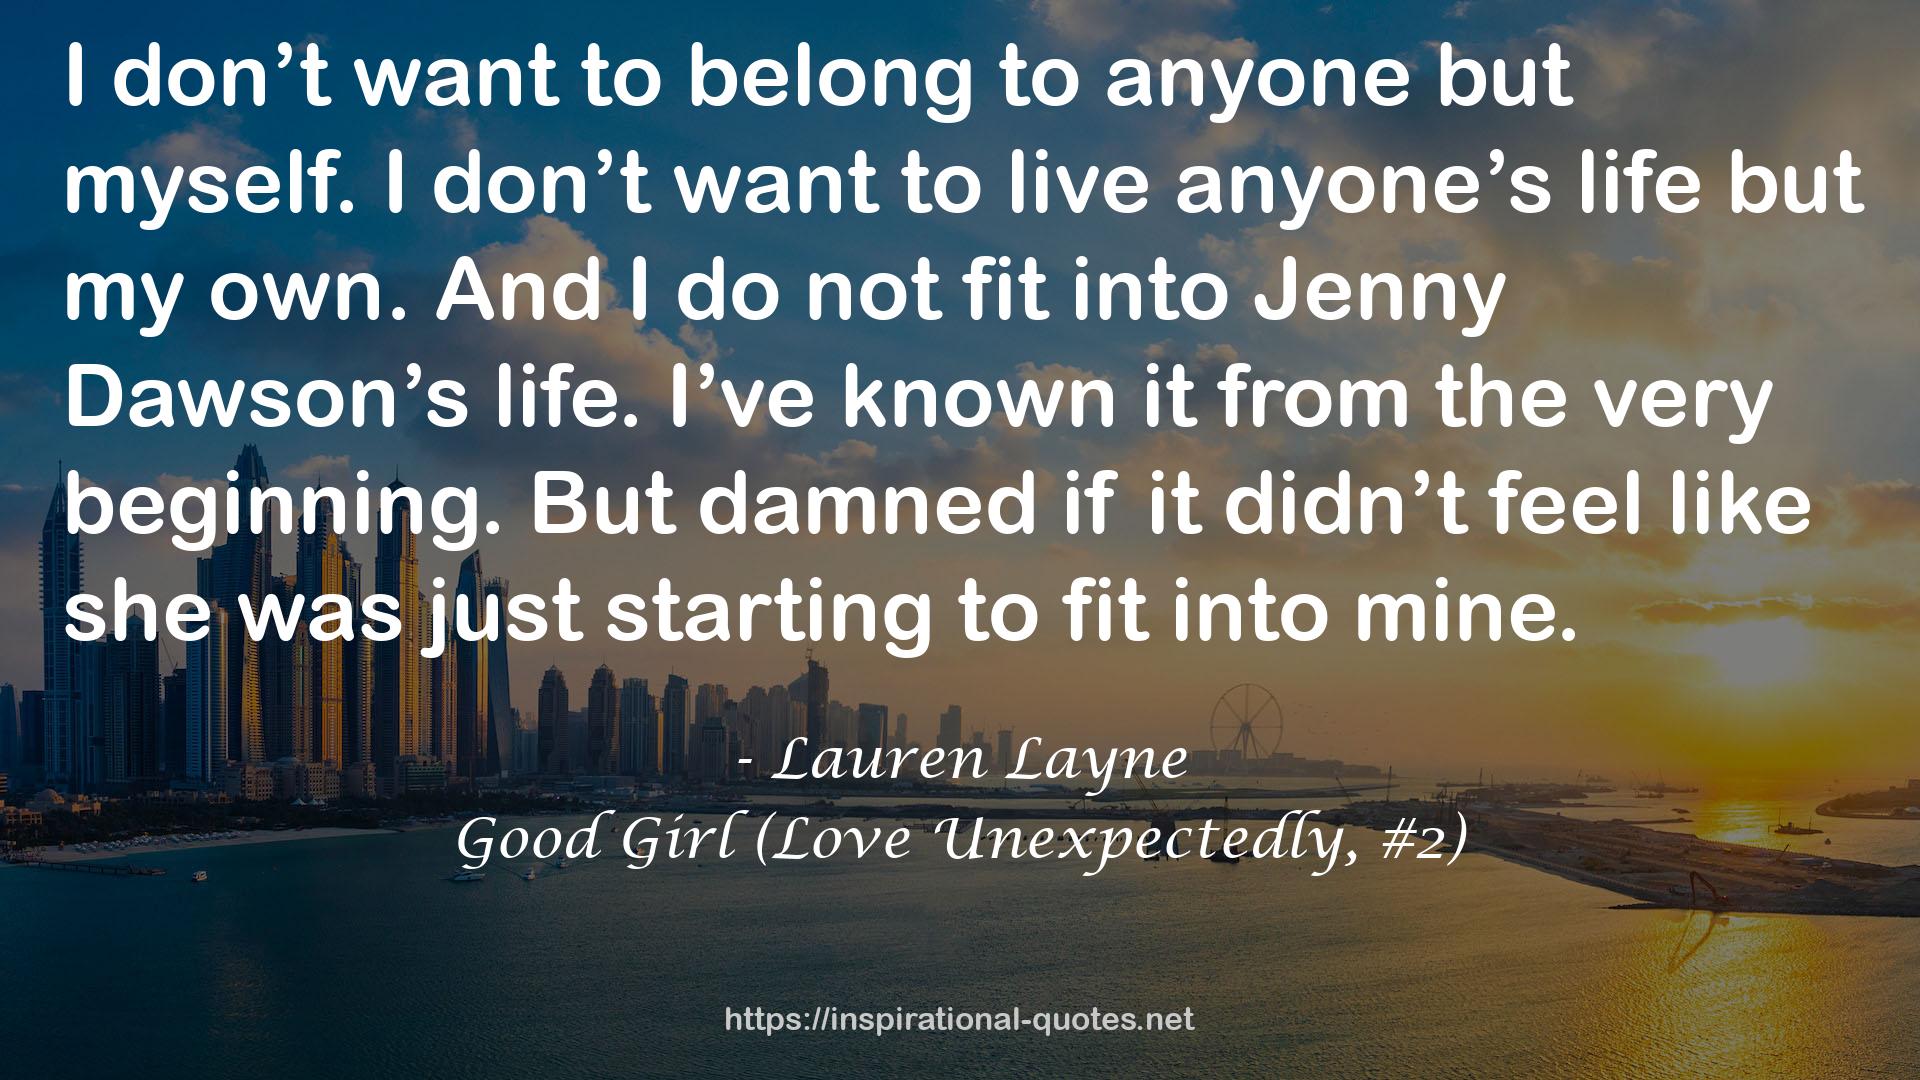 Good Girl (Love Unexpectedly, #2) QUOTES